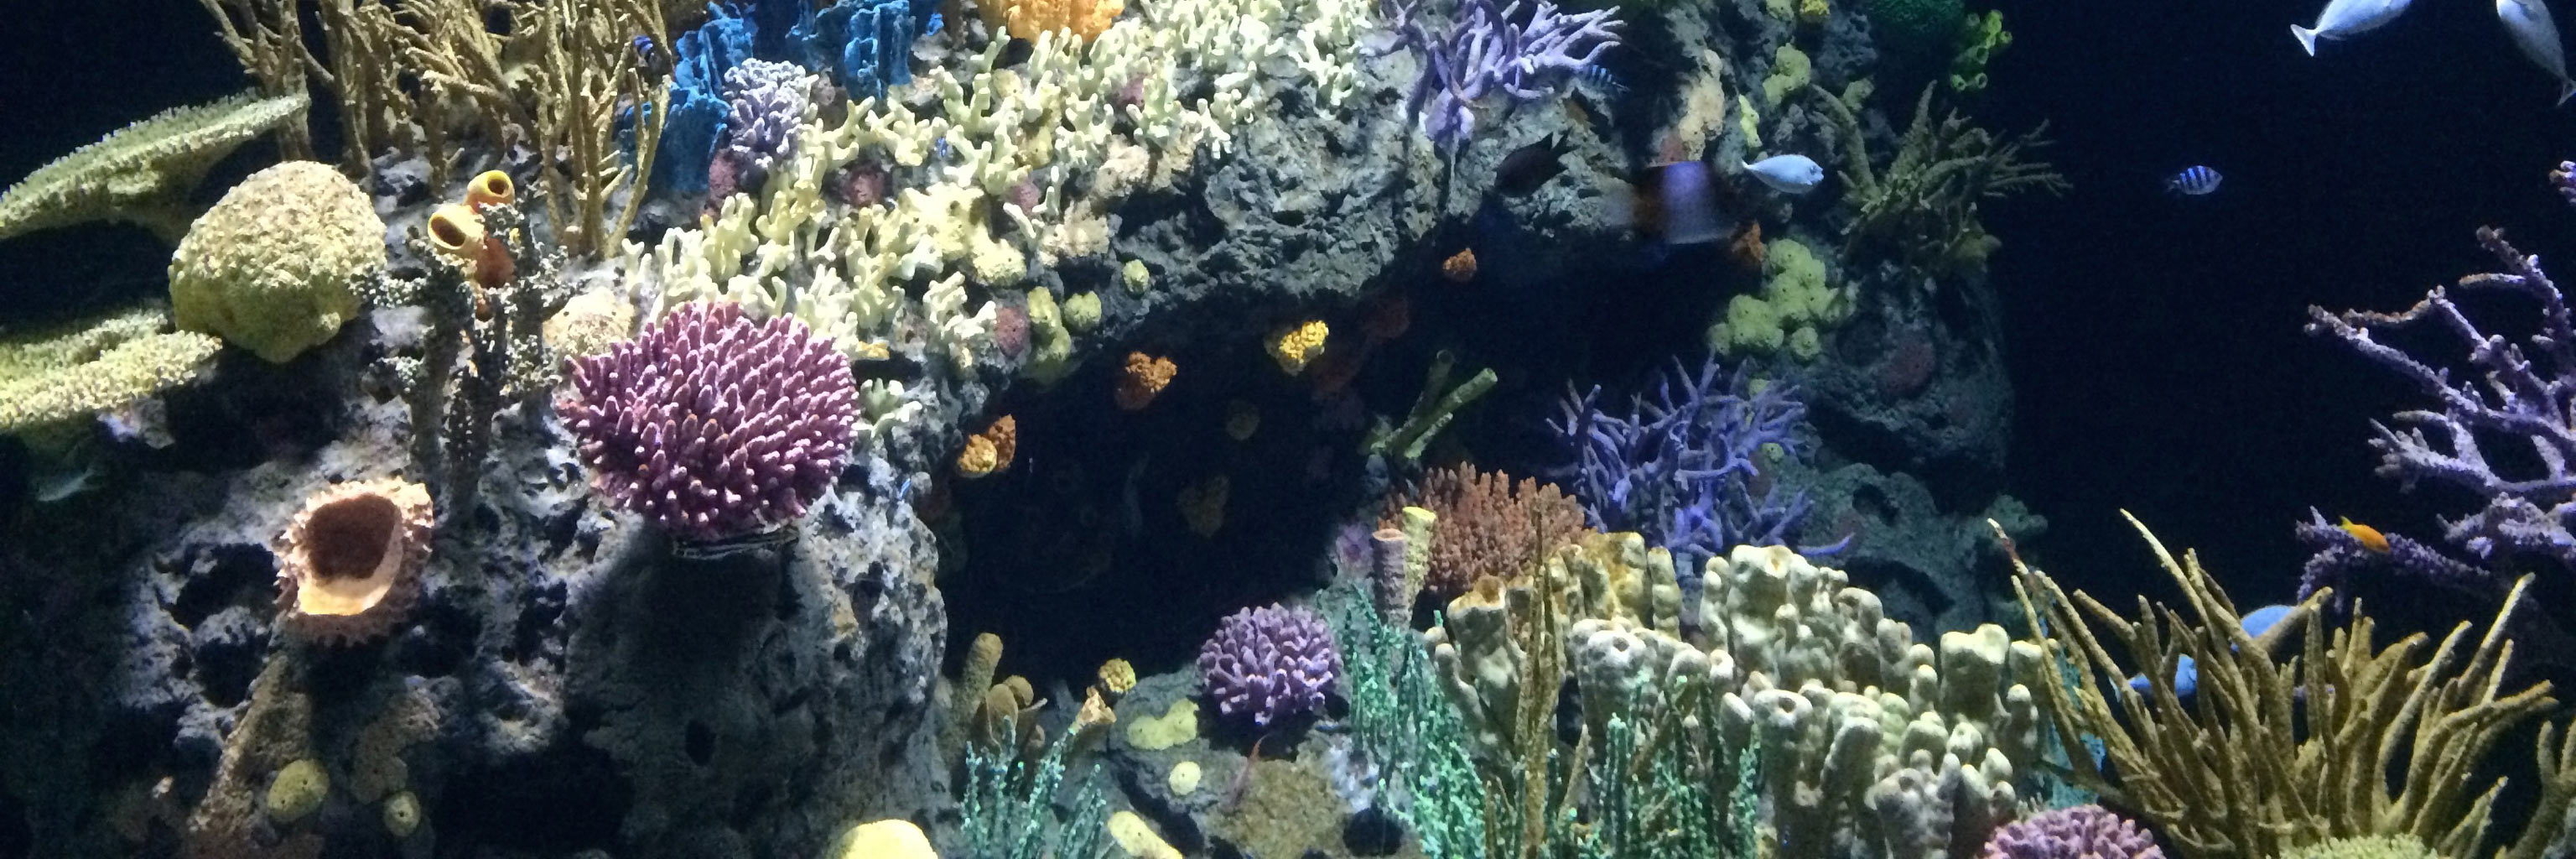 Colorful reef tank